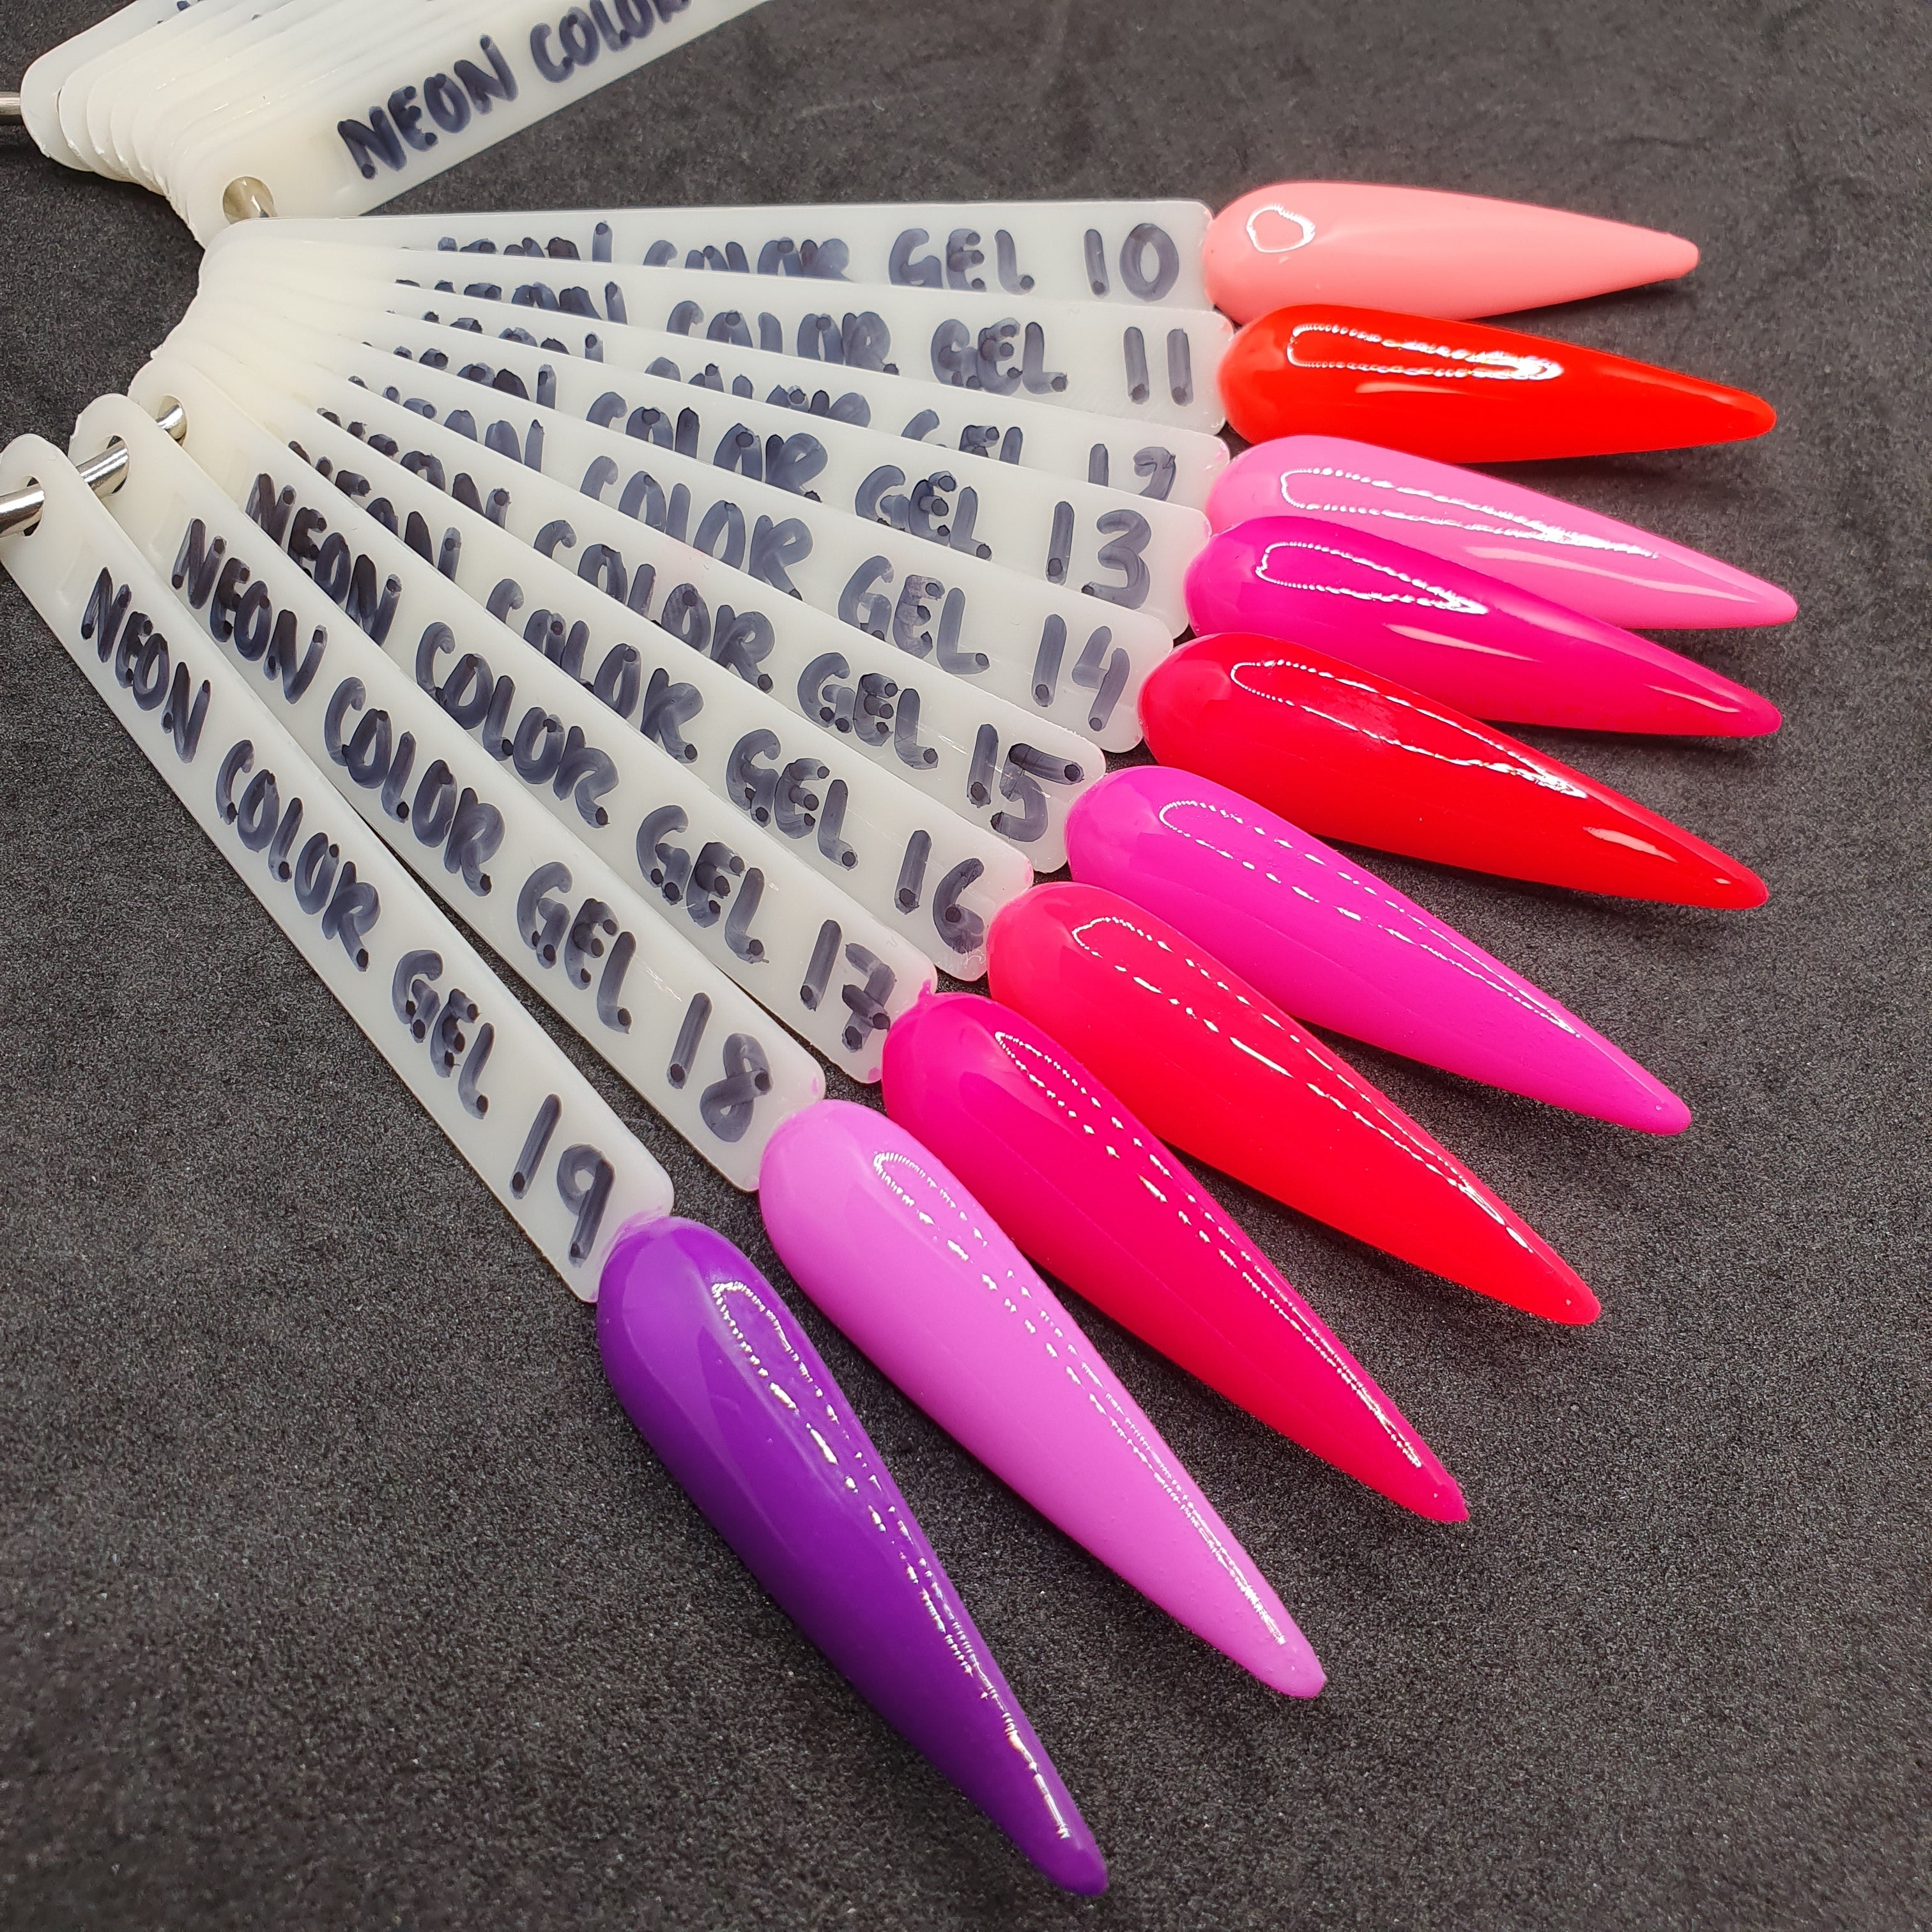 NEW - GND NEON GEL COLOR - 01